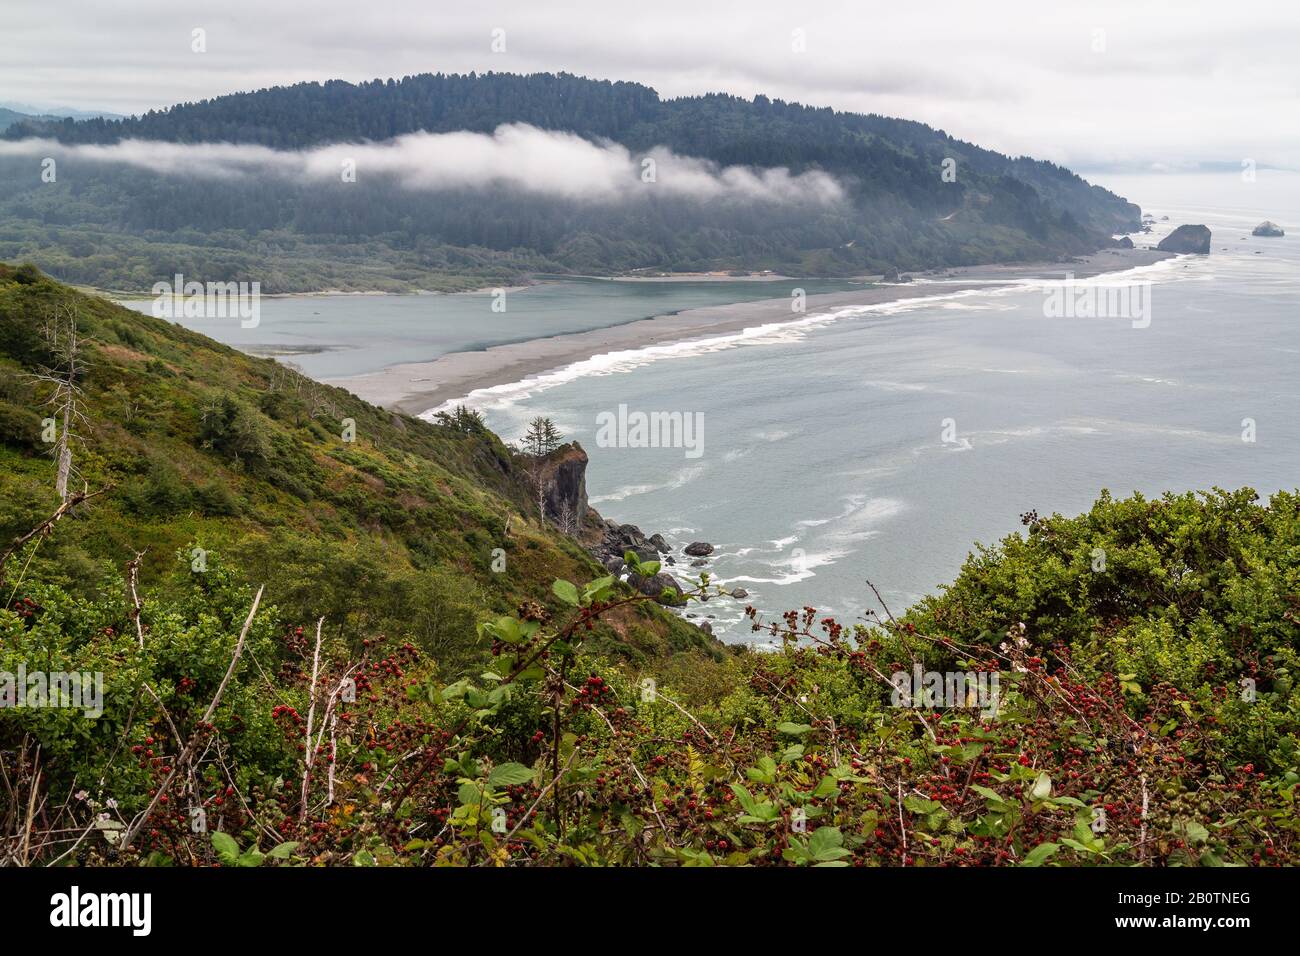 Hiking high amongst the berries, vista overlook where the Pacific Ocean meets the Klamath River in Northern California. Stock Photo